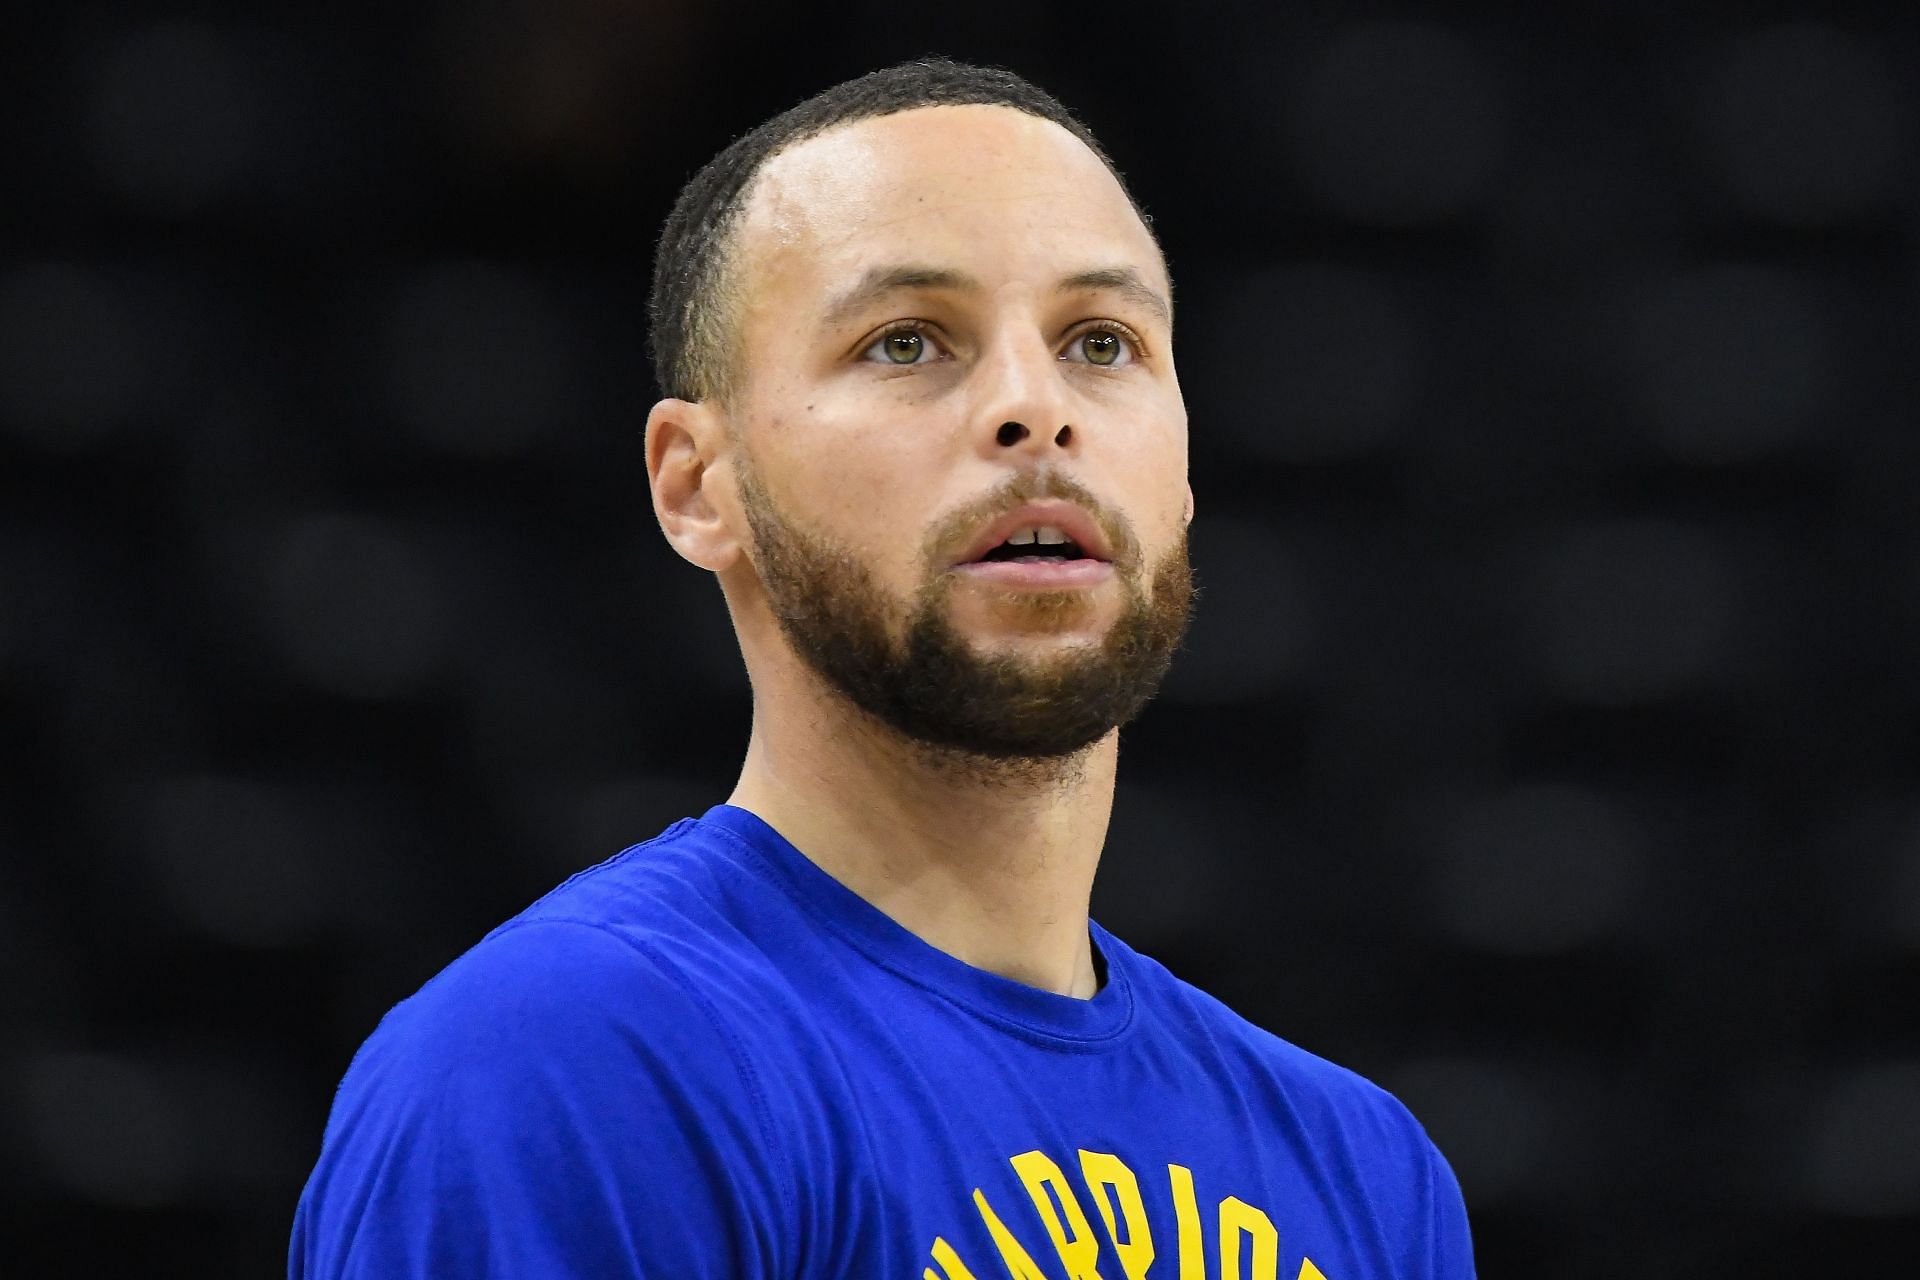 Steph Curry of the Golden State Warriors warms up before a game against the Utah Jazz on February 9 in Salt Lake City, Utah.